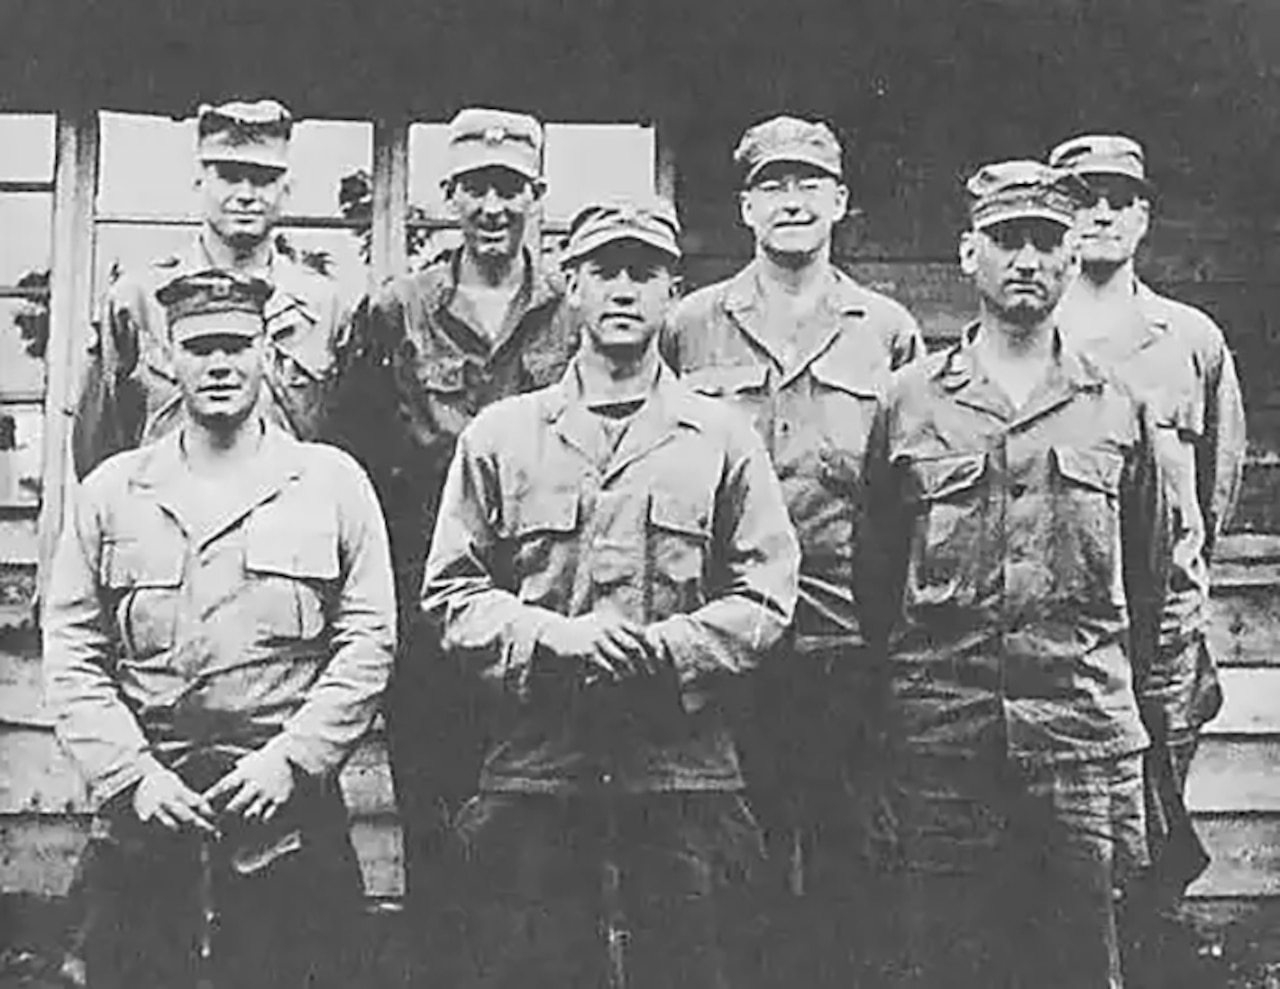 Seven men stand in two rows to pose for a photo.